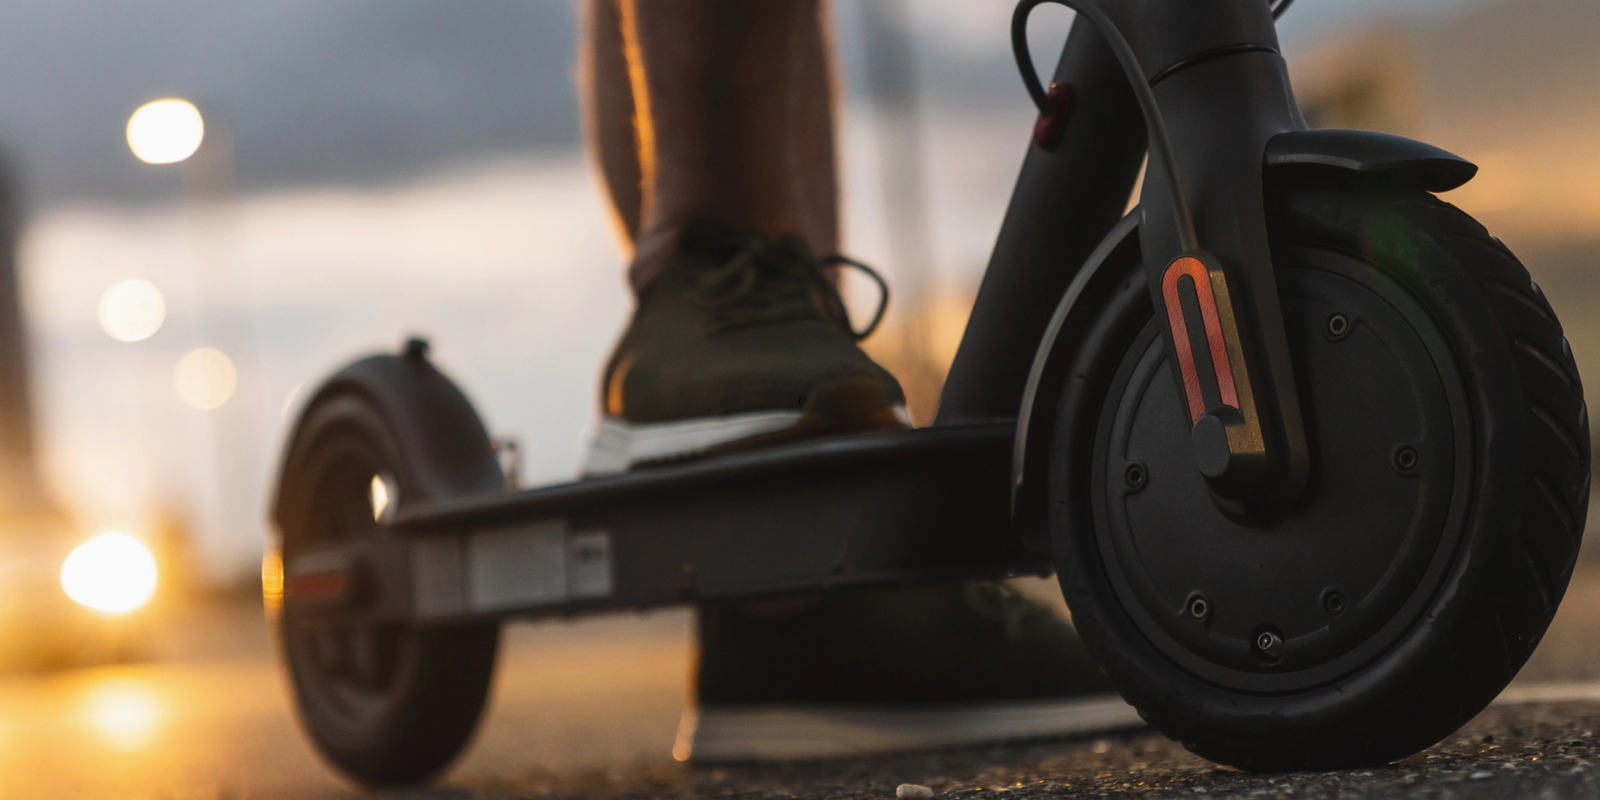 Understanding Tire Pressure For Electric Scooters: Why It Matters And How To Check It